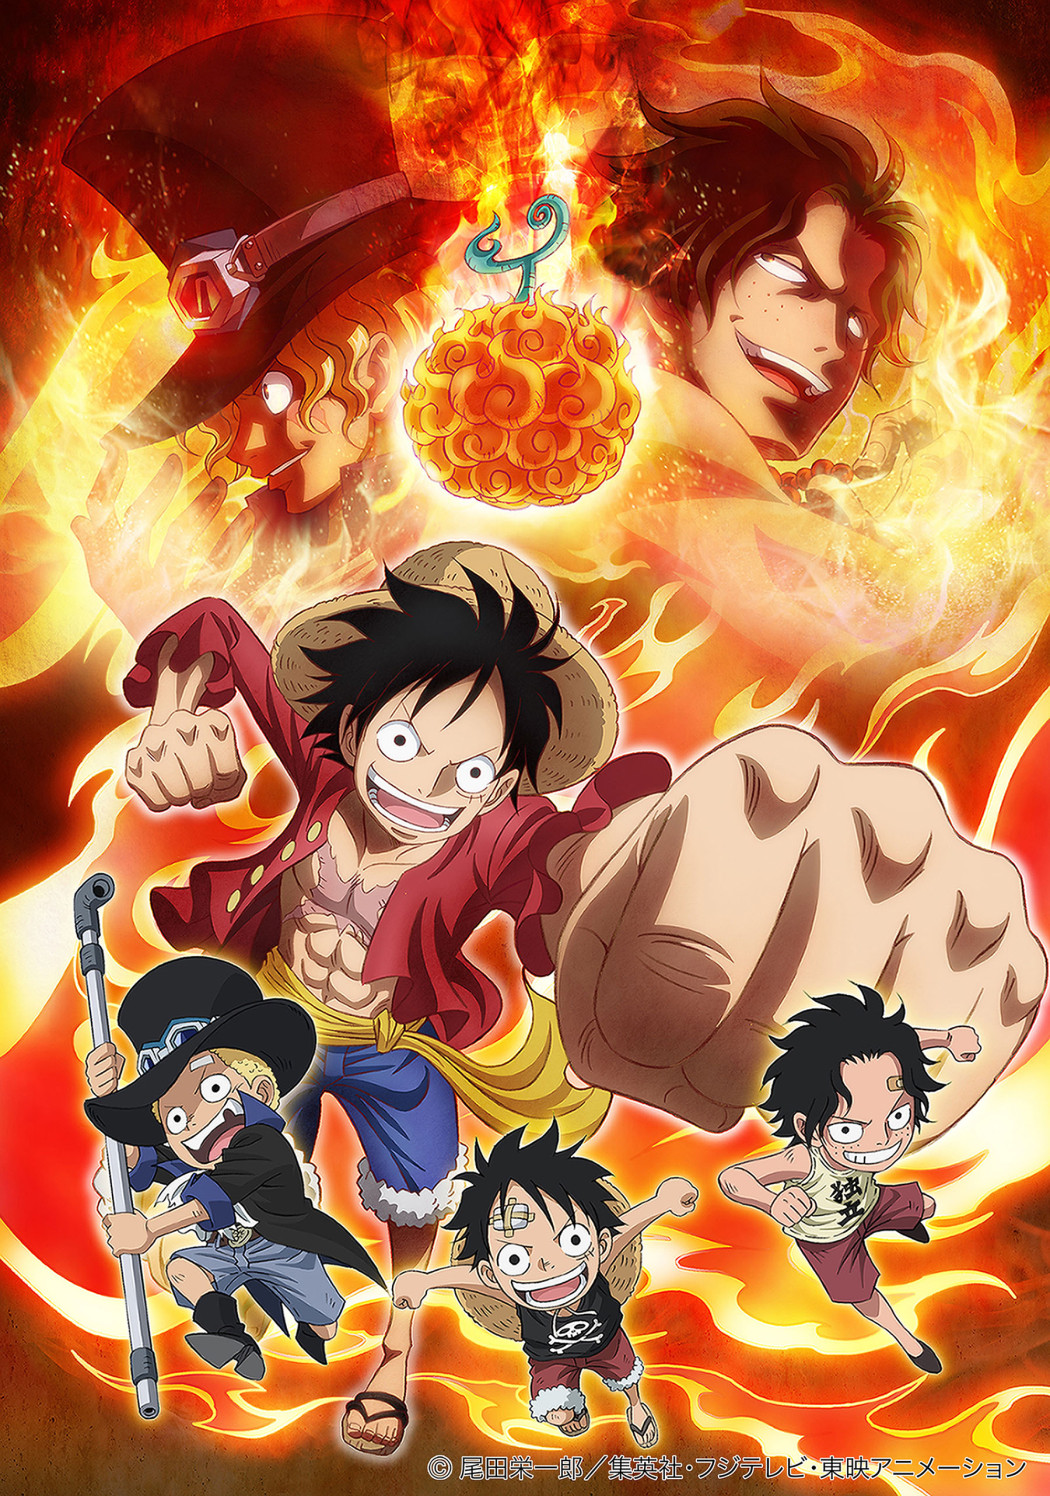 Mobile wallpaper: Anime, Flame, Portgas D Ace, One Piece, Monkey D Luffy,  Sabo (One Piece), 1098199 download the picture for free.